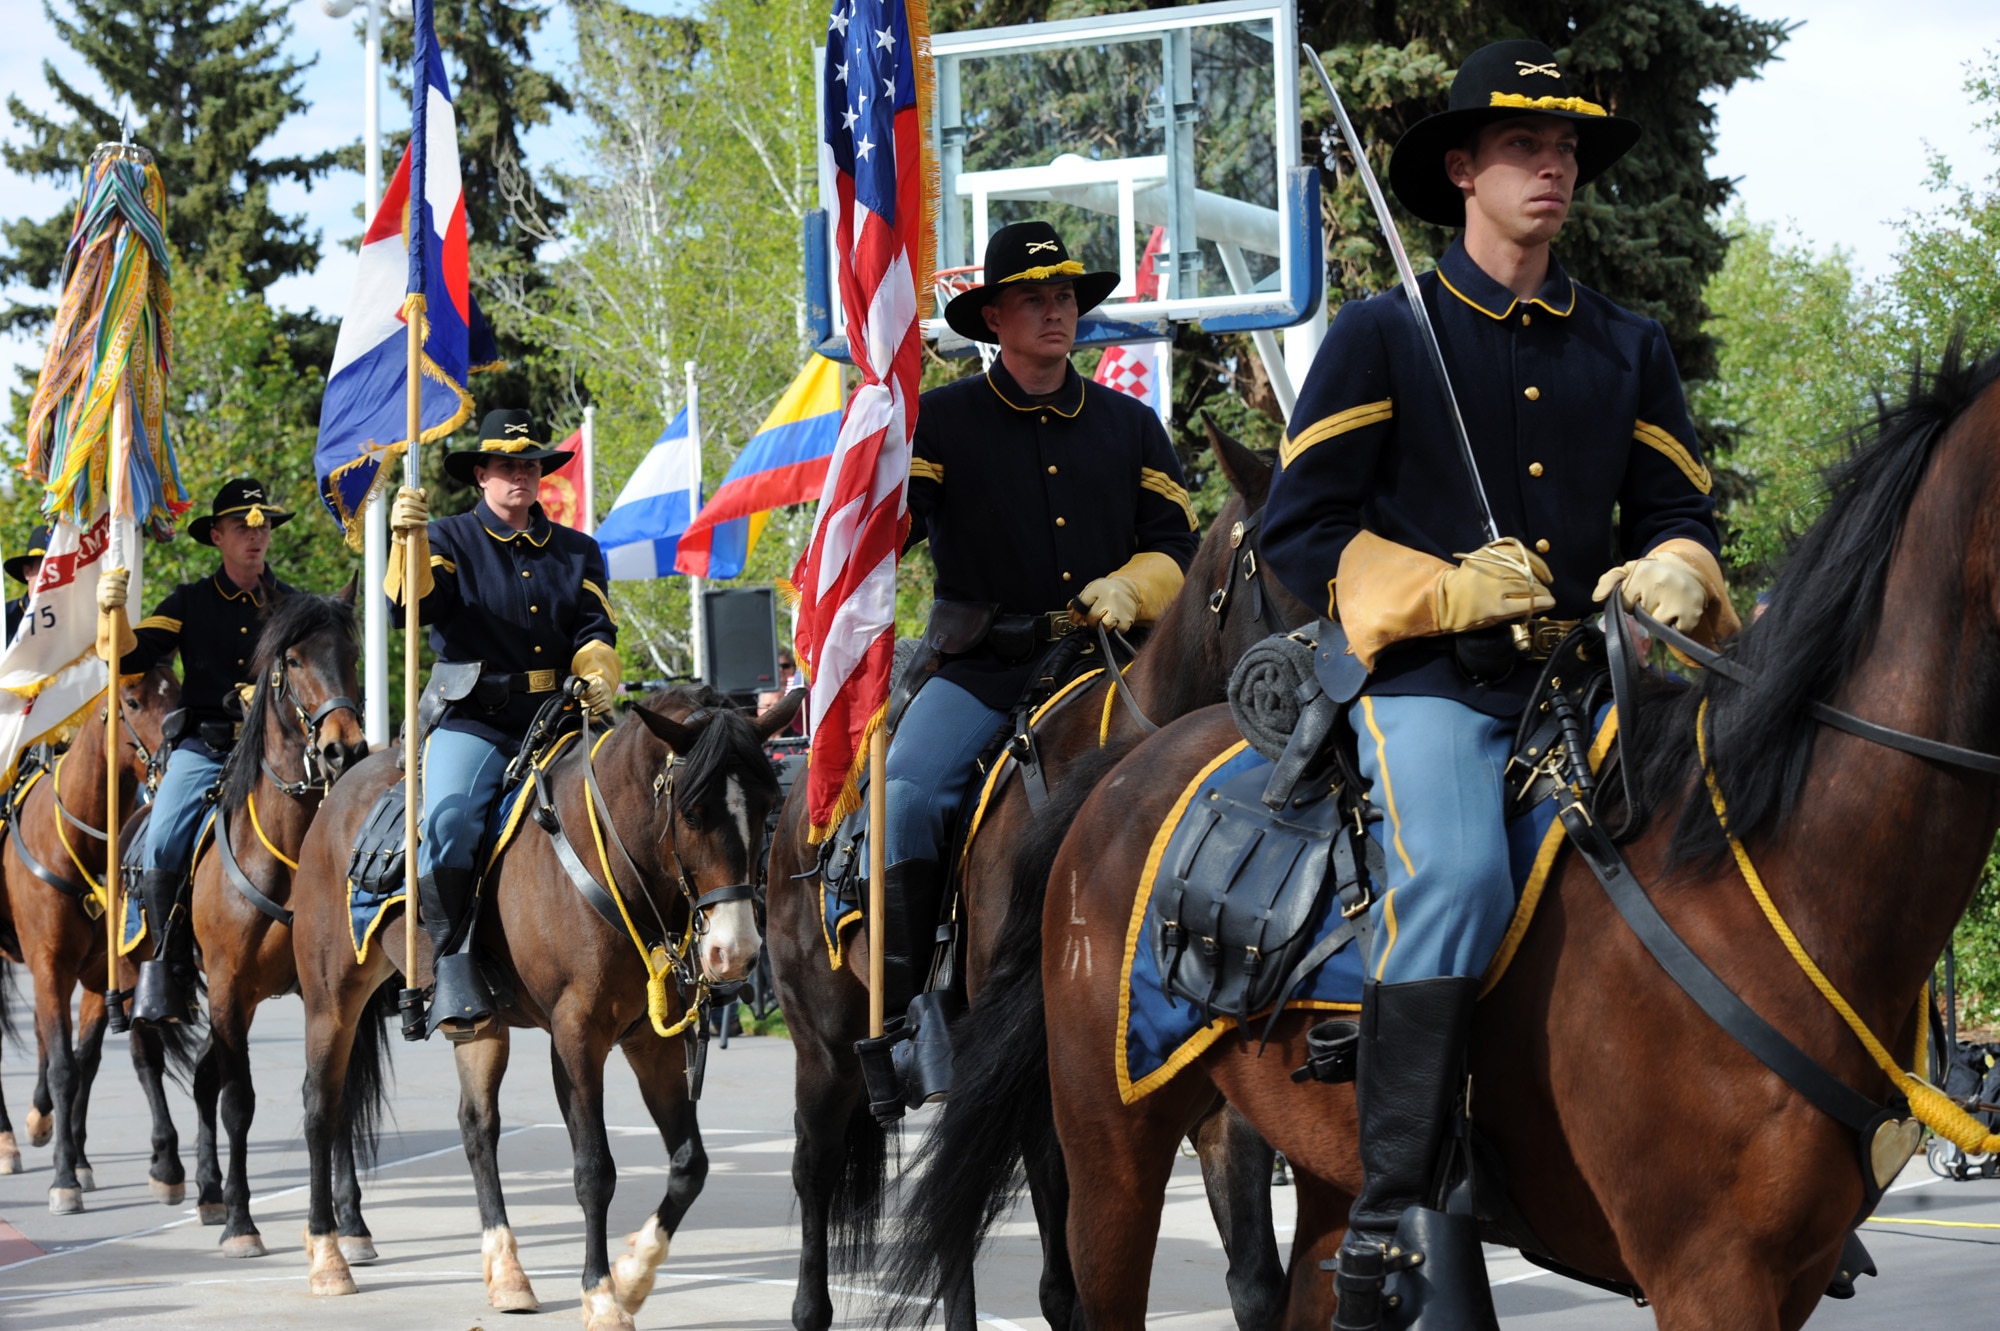 Members of the Ft. Carson Mounted Color Guard travel down the Olympic Pathway May 16, 2011, during the 2011 Warrior Games opening ceremony at the U.S. Olympic Training Center in Colorado Springs, Colo. Some 200 wounded warriors and disabled veterans from all the military services are competing in paralympic-style athletic events May 16 through May 21. (U.S. Air Force photo/Staff Sgt. Desiree N. Palacios)
